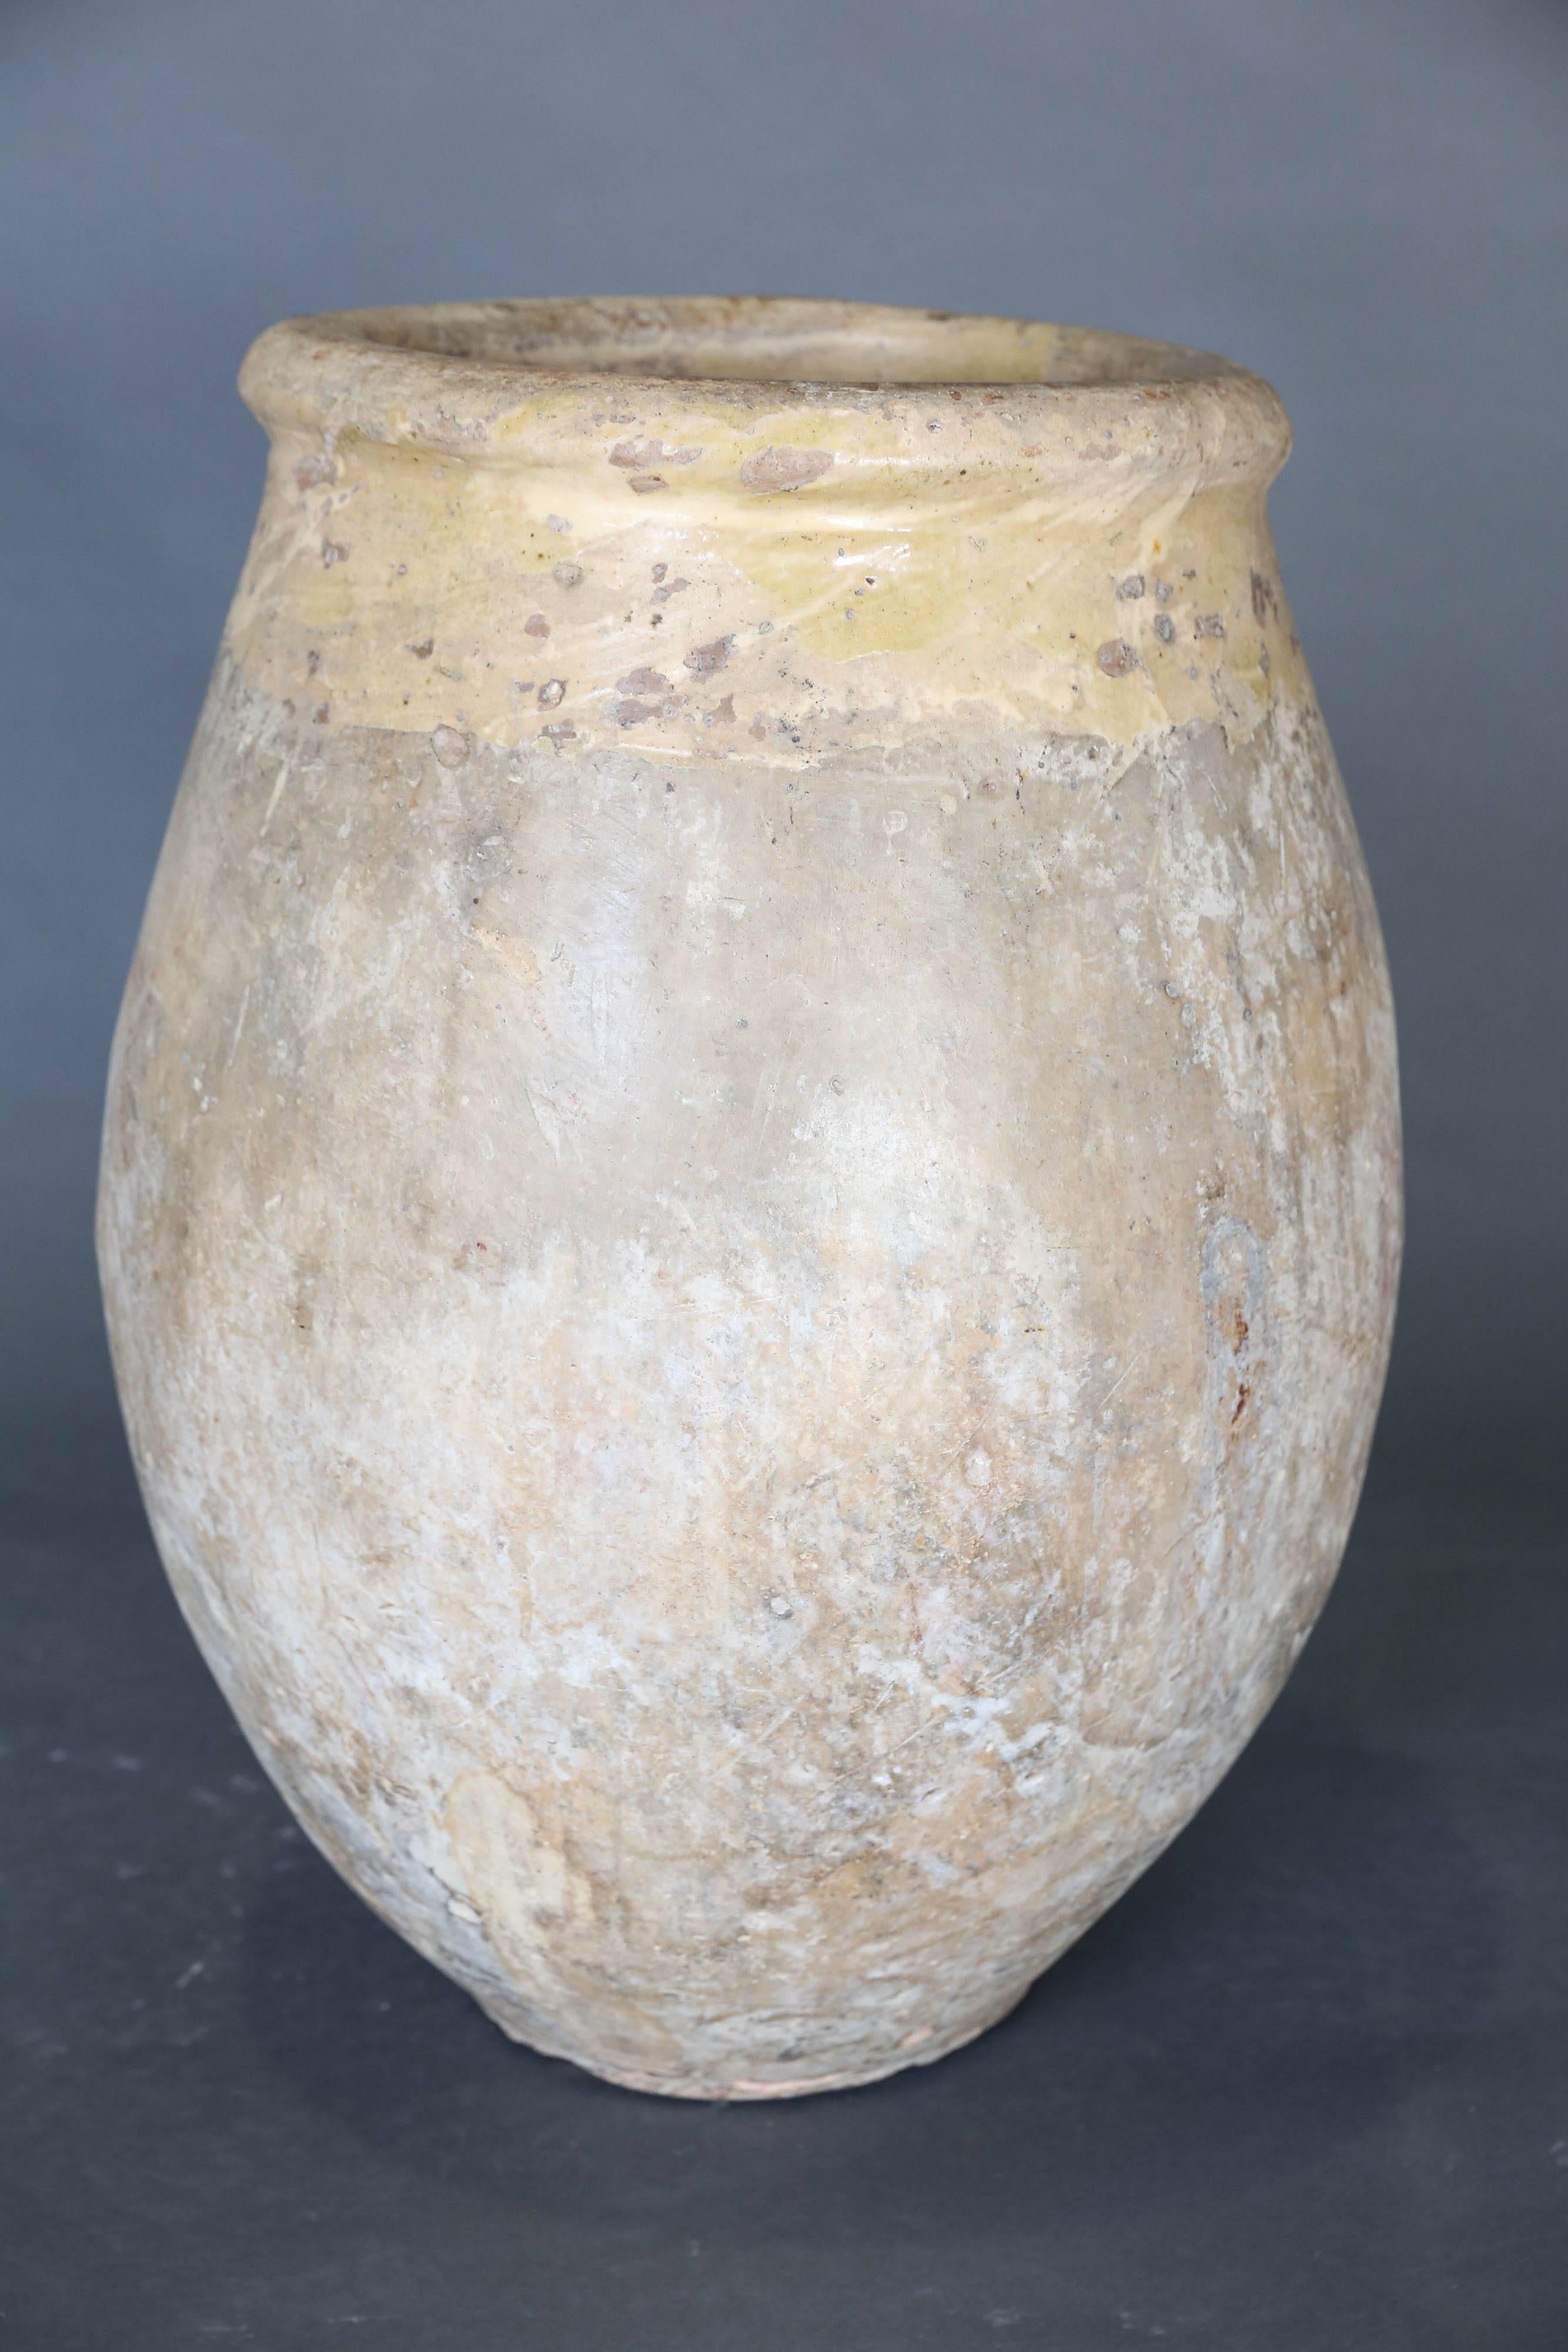 19th century Biot jar from France used to store and ship olives aboard ships. Top of opening is 10.5